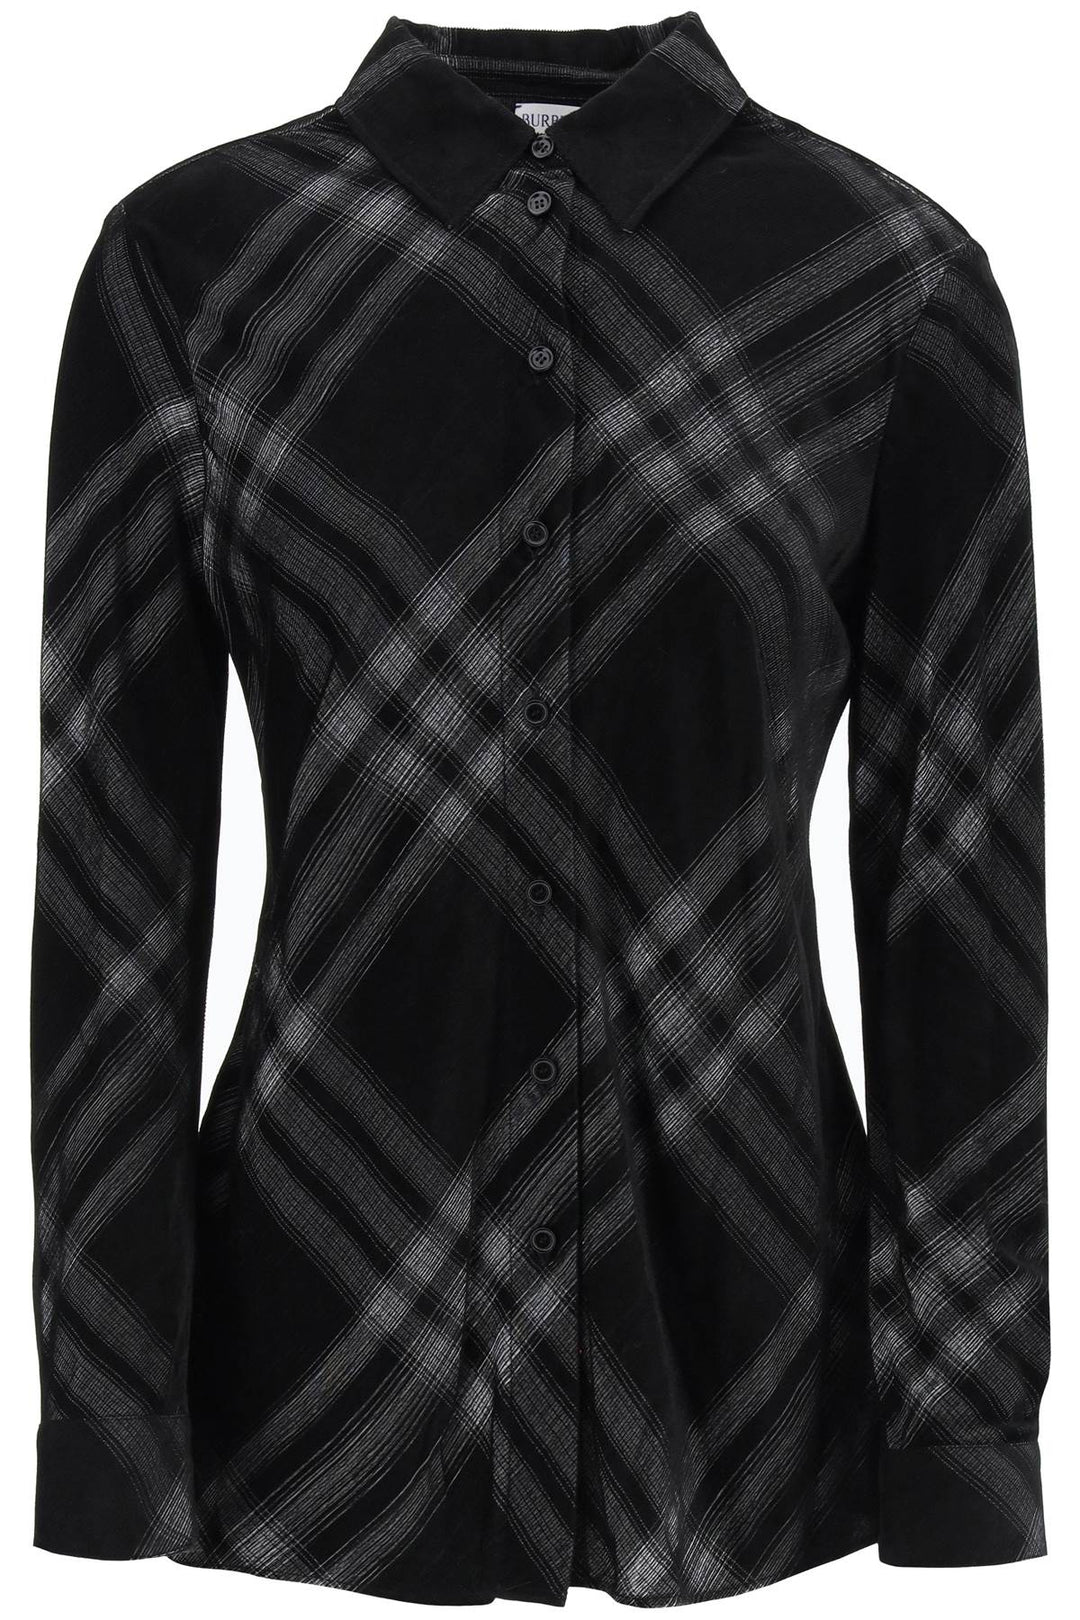 Burberry Replace With Double Quotecheckered Corduroy   Nero